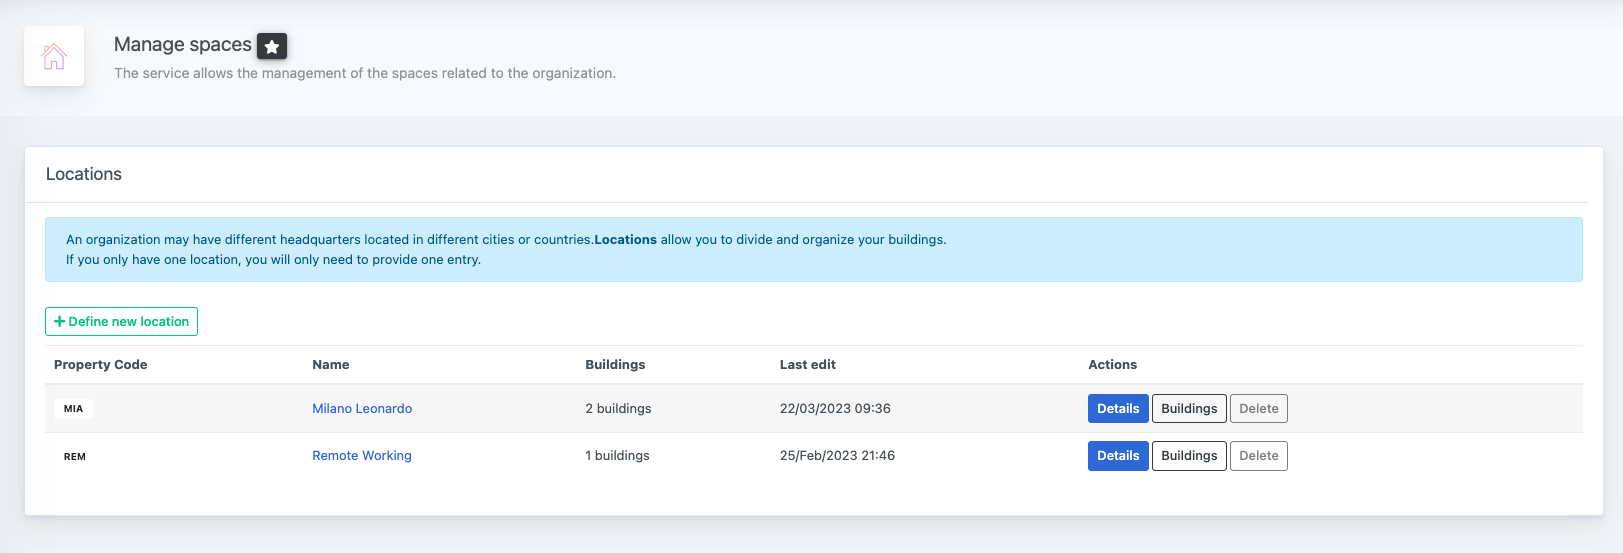 Manage Spaces - Location view